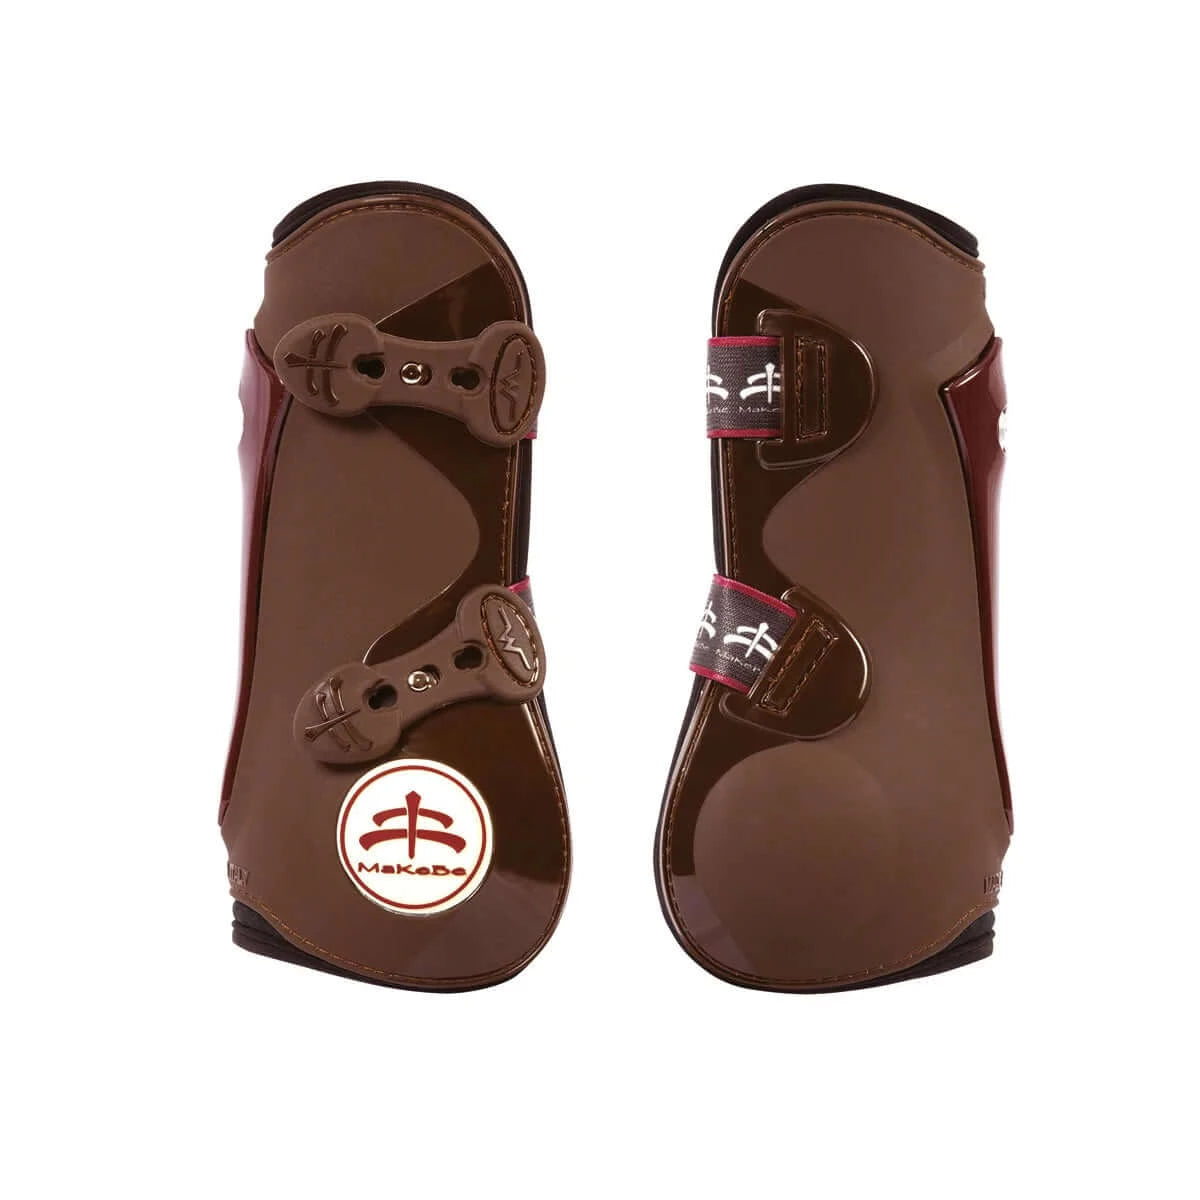 Temple forefoot tendon guards 